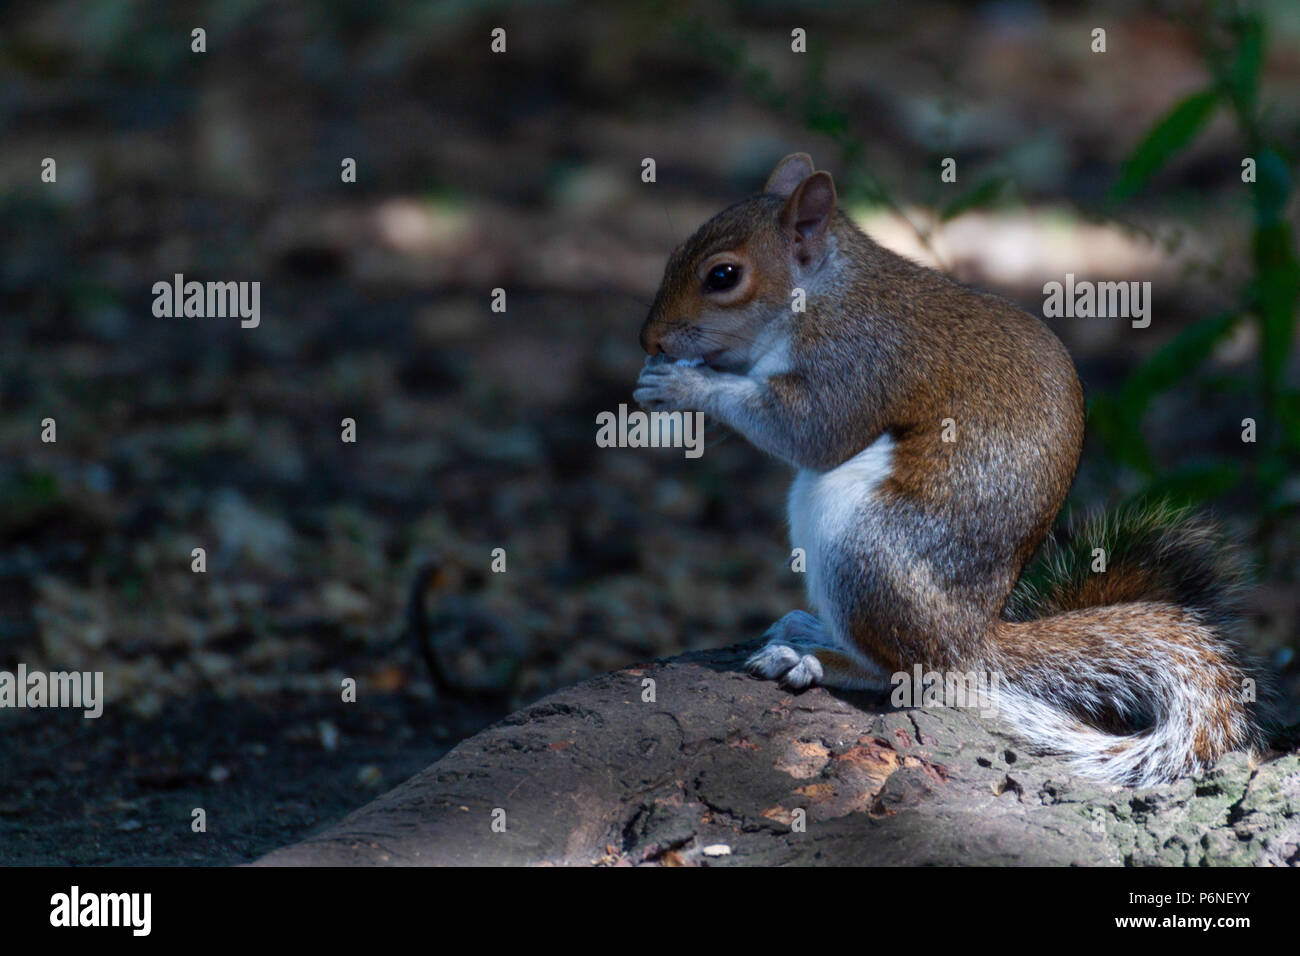 Squirrel eating food in a public park Stock Photo